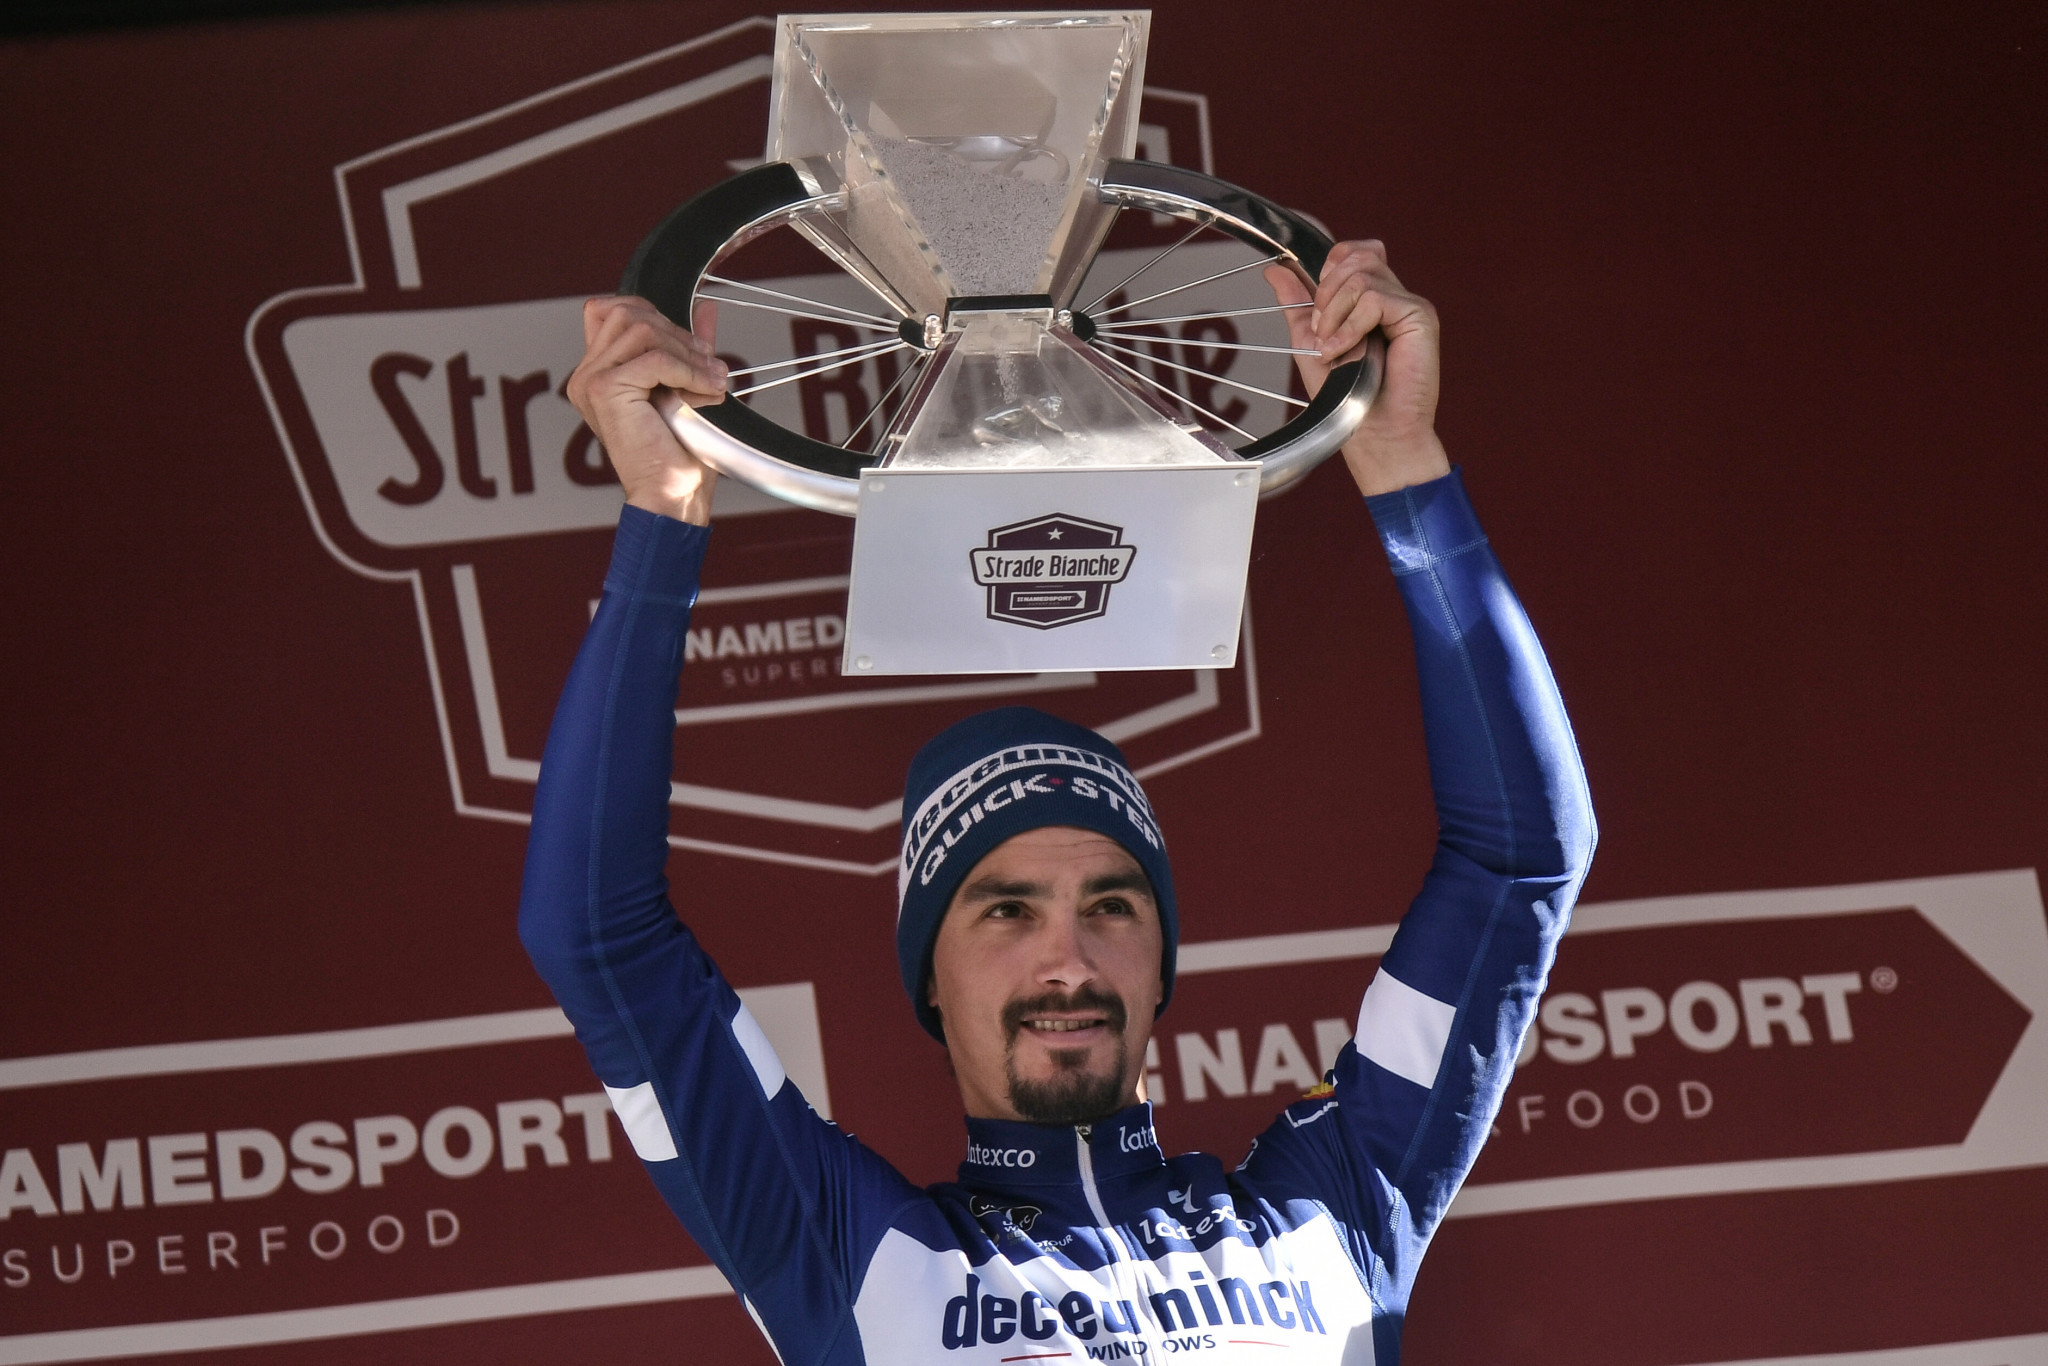 Julian Alaphilippe became the first French rider to win the men's Strade Bianche as he triumphed at the spring classic race in Italy ©Getty Images